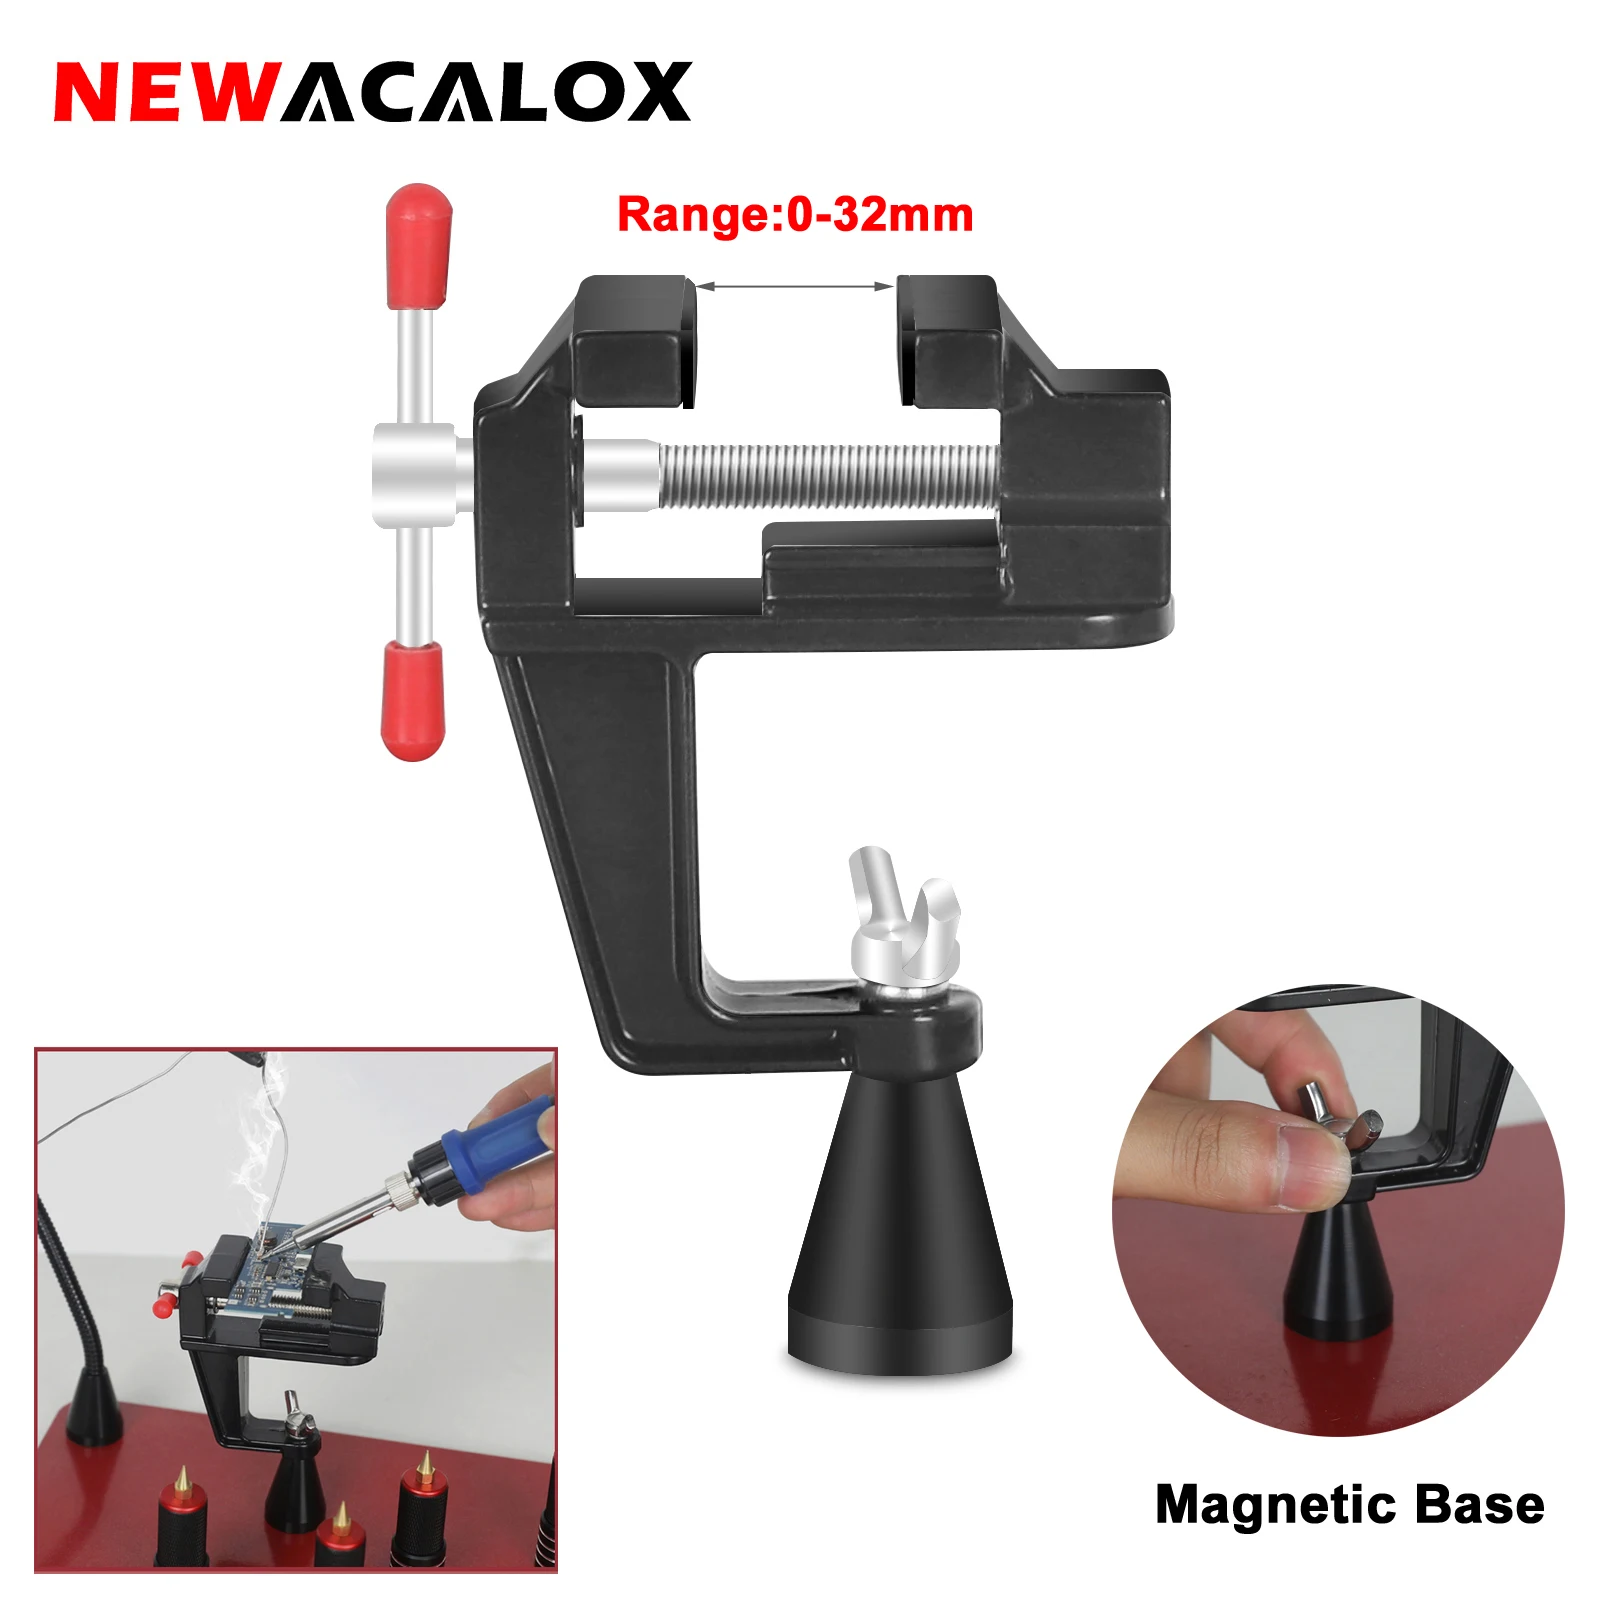 NEWACALOX Magnetic PCB Circuit Motherboard Fixture 360° Rotation Flexible Arm Soldering Third Helping Hand Welding RepairingTool newacalox magnetic pcb circuit board holder flexible arm soldering third hand welding station soldering iron stand repair tools